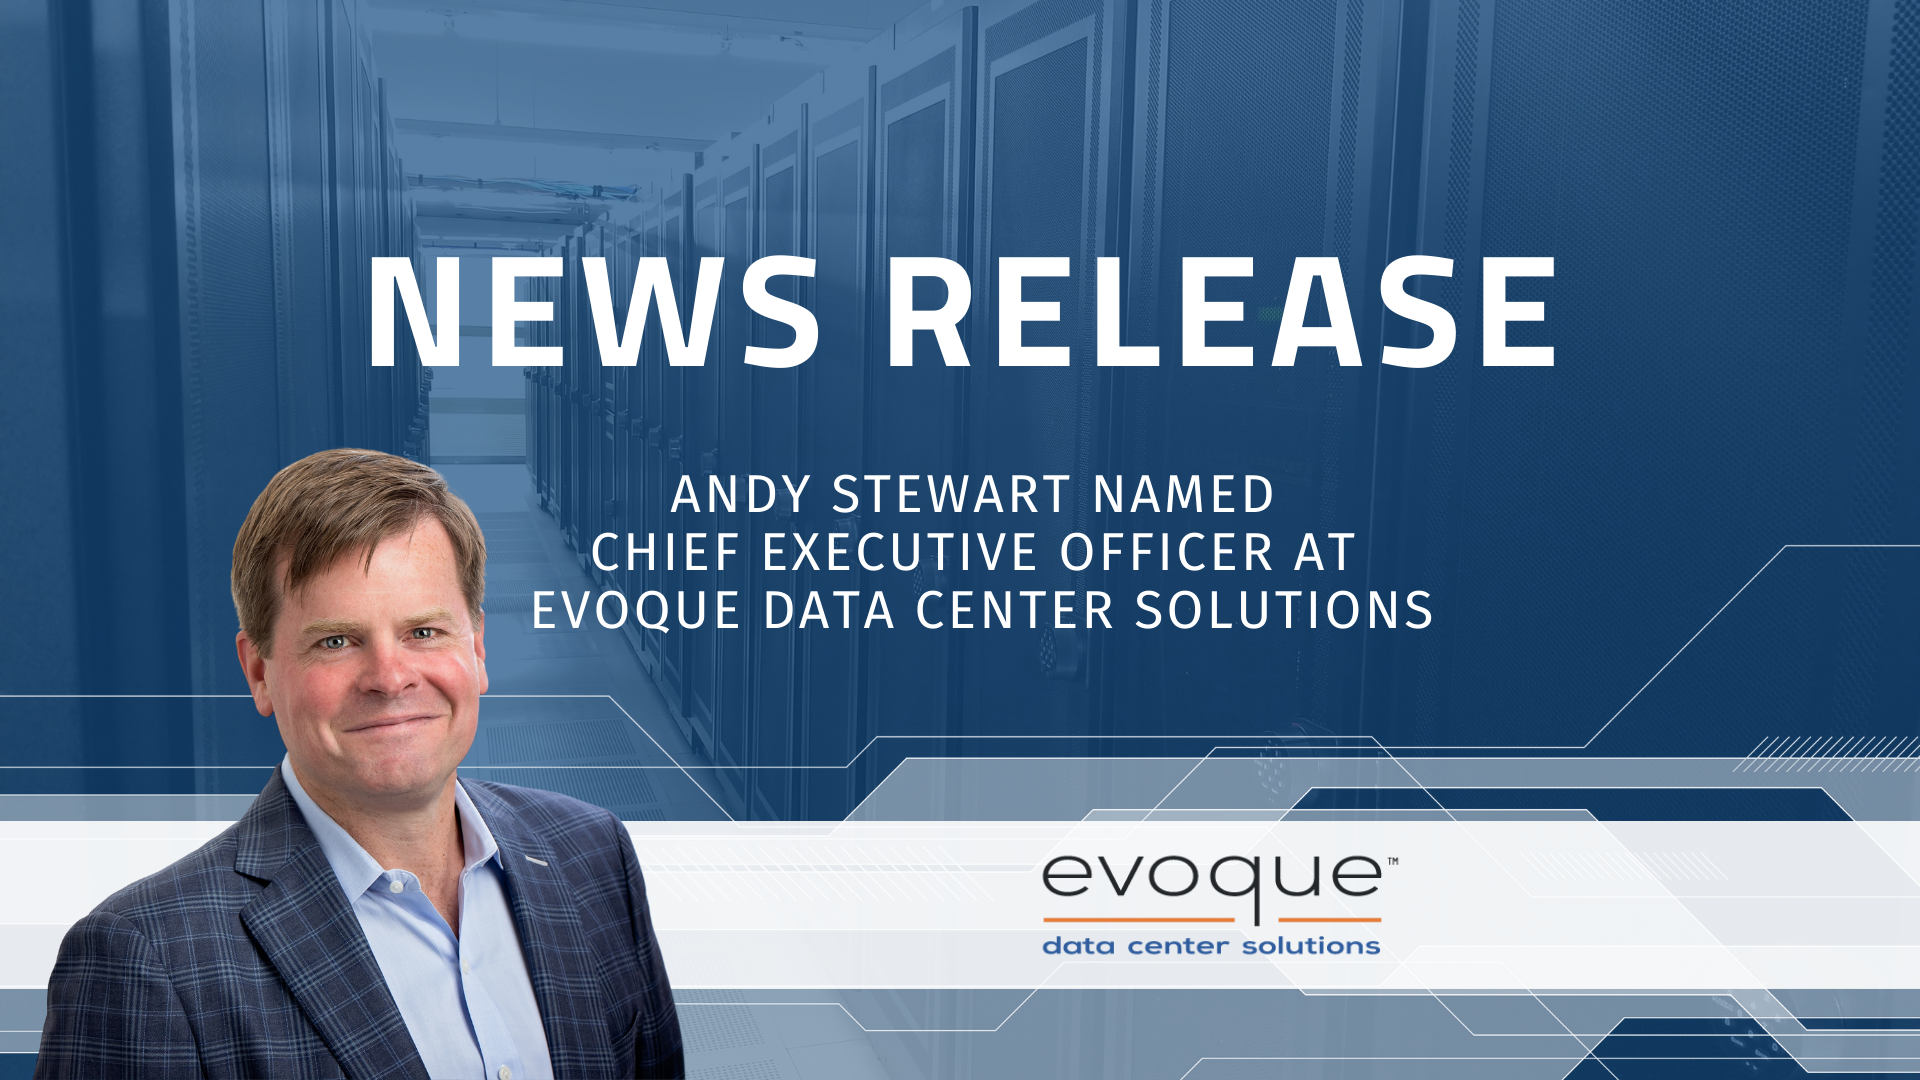 Andy Stewart Named Chief Executive Officer At Evoque Data Center Solutions